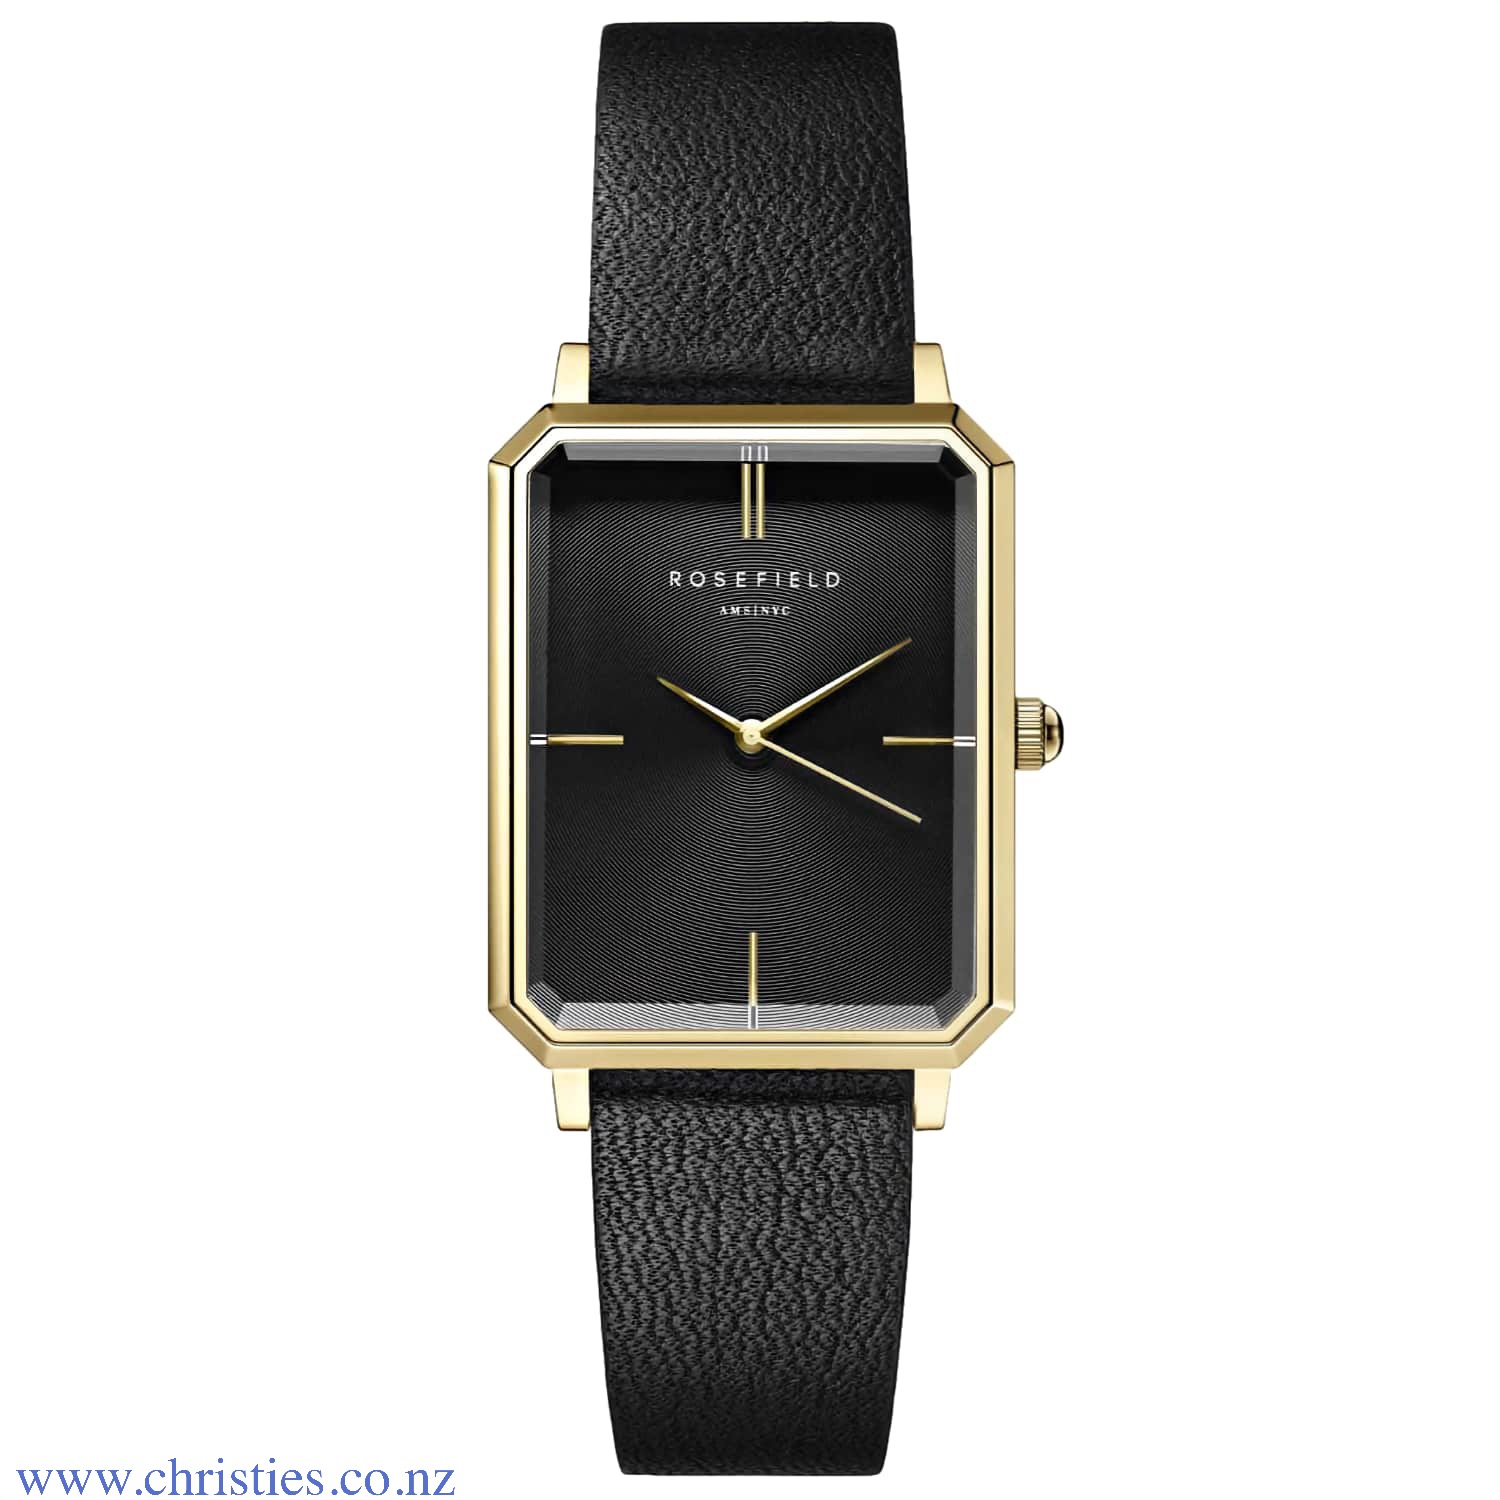 OBSBG-O49 Rosefield The Octagon Black Sunray Black Leather Gold Watch. The Octagon is Rosefield's newest collection of modern watches – an instant classic. The rare octagonal face shape and polished 5-link bracelet recall 1920s elegance, redefining the wa